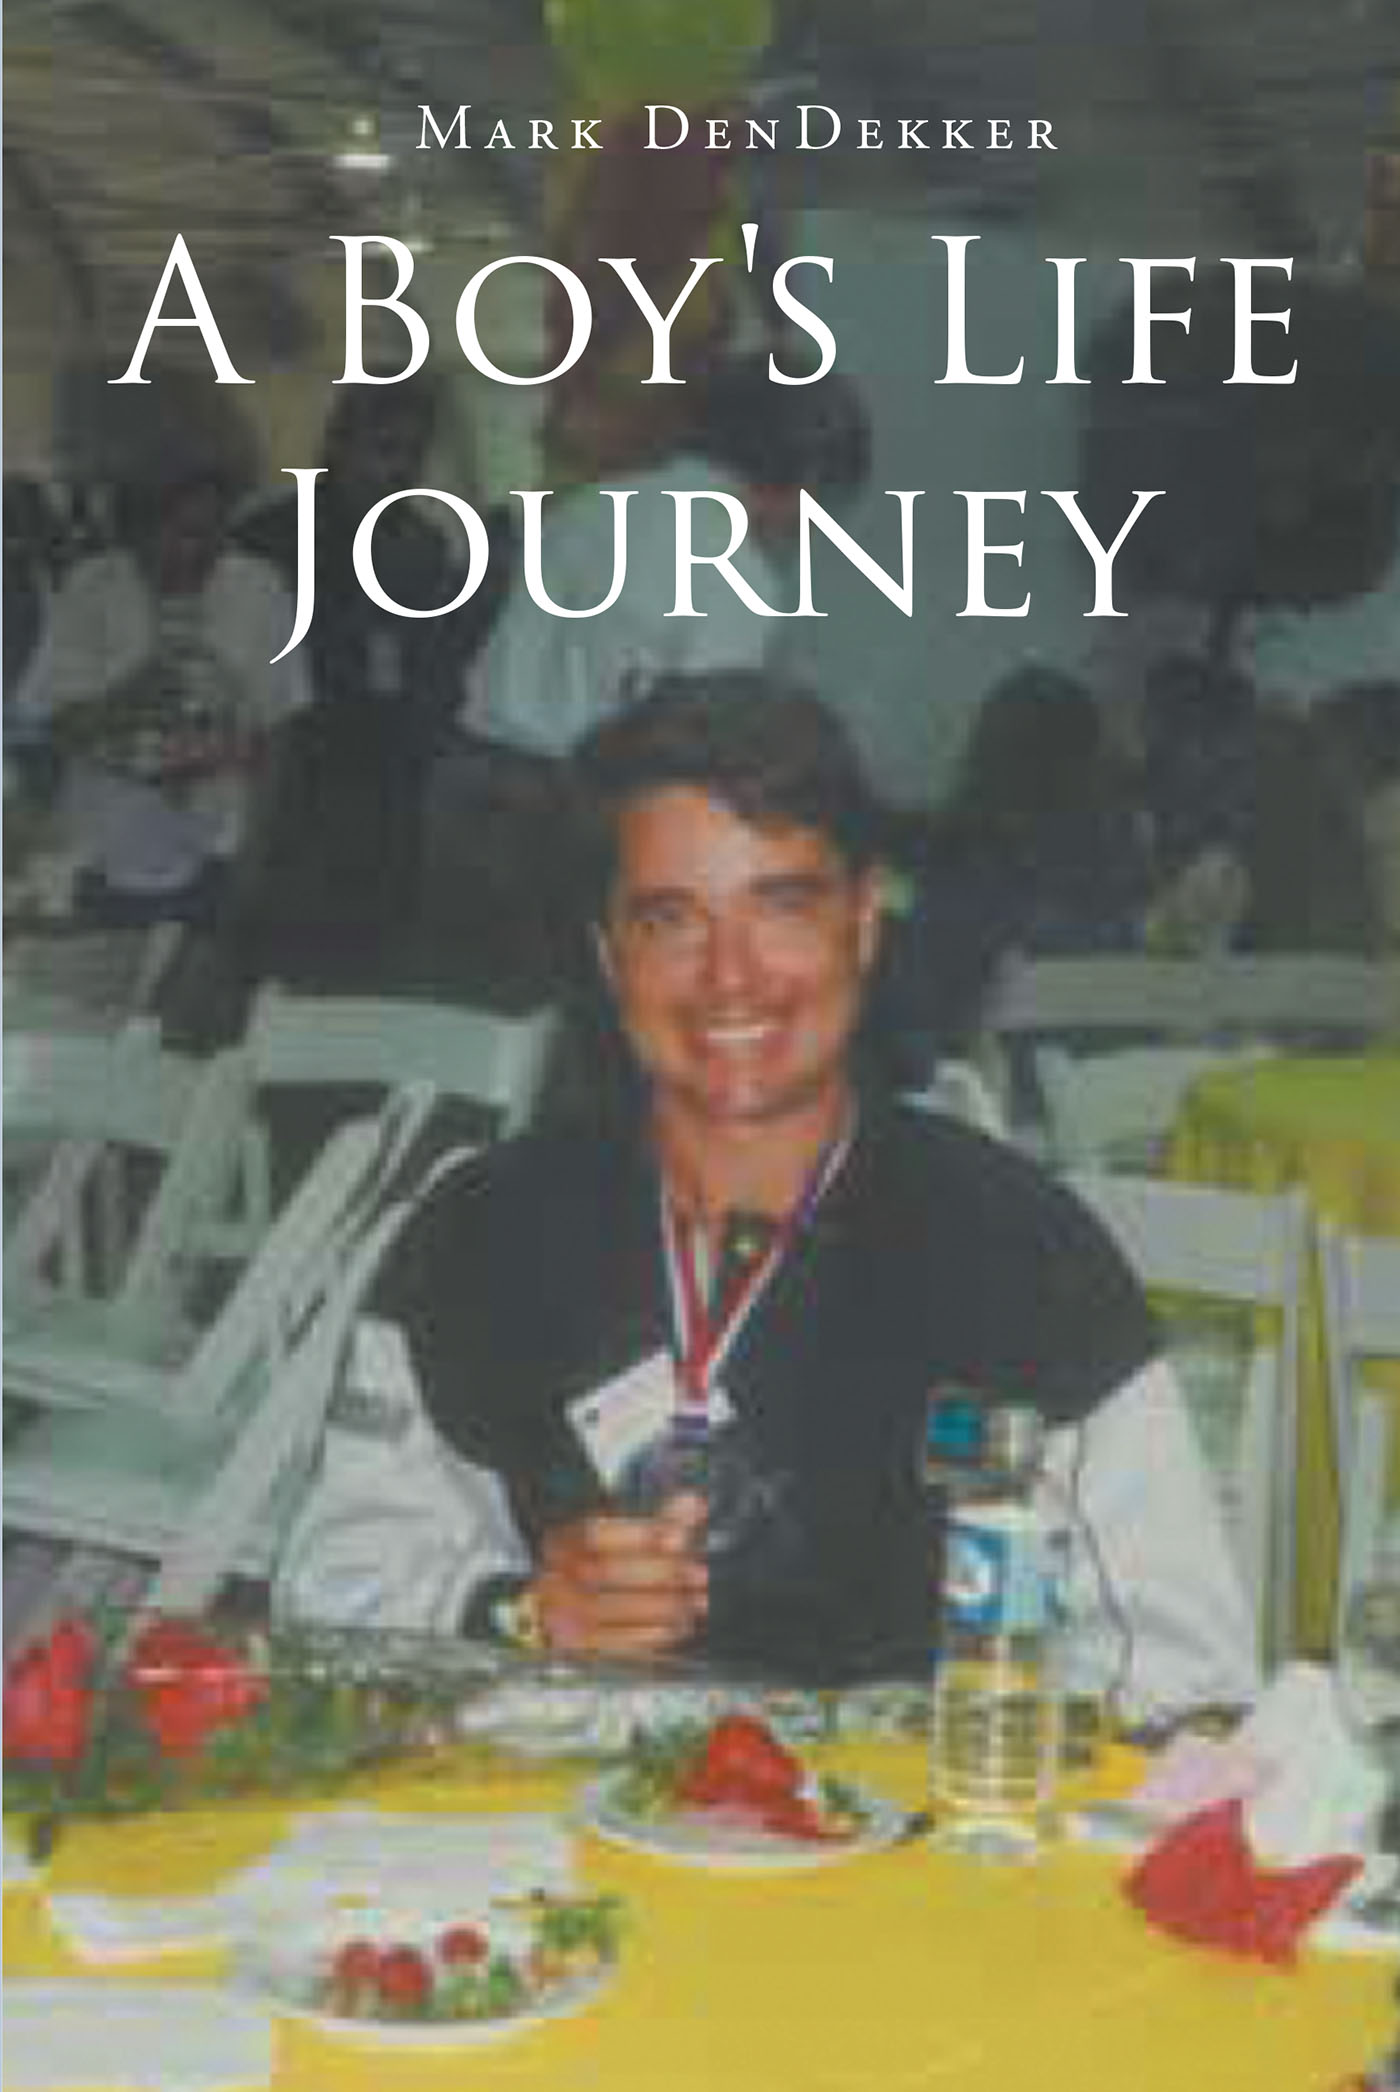 Author Mark DenDekker’s New Book, "A Boy's Life Journey," is a Fascinating Memoir Exploring the Author's Exploits and Trials That Have Shaped His Lived Experiences